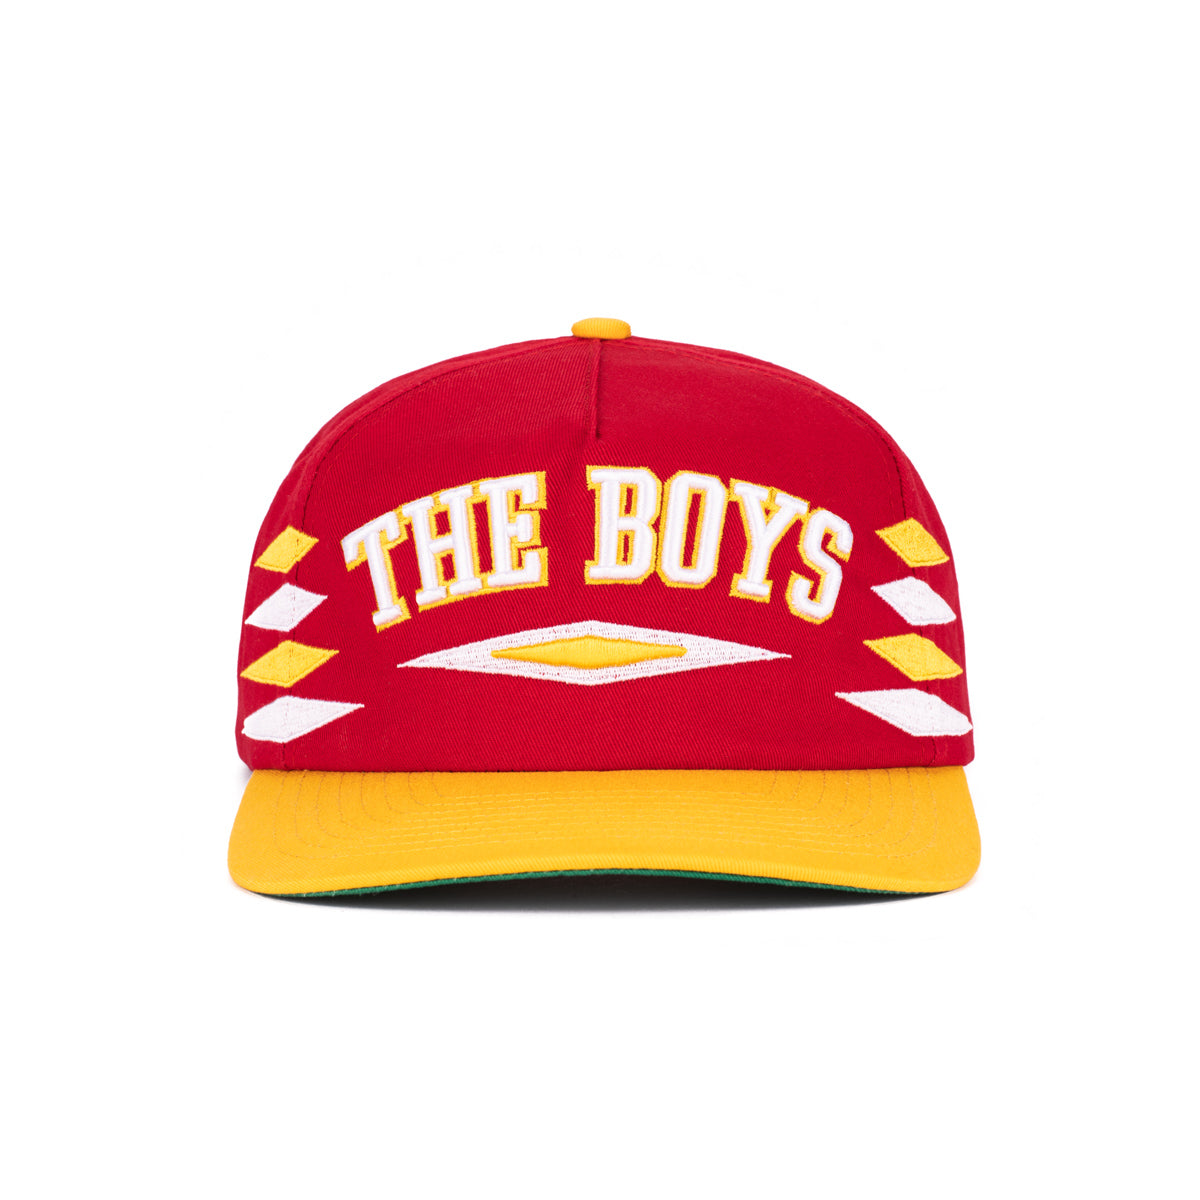 The Boys Diamond Retro Hat-Hats-Bussin With The Boys-Red/Yellow-OS-Barstool Sports